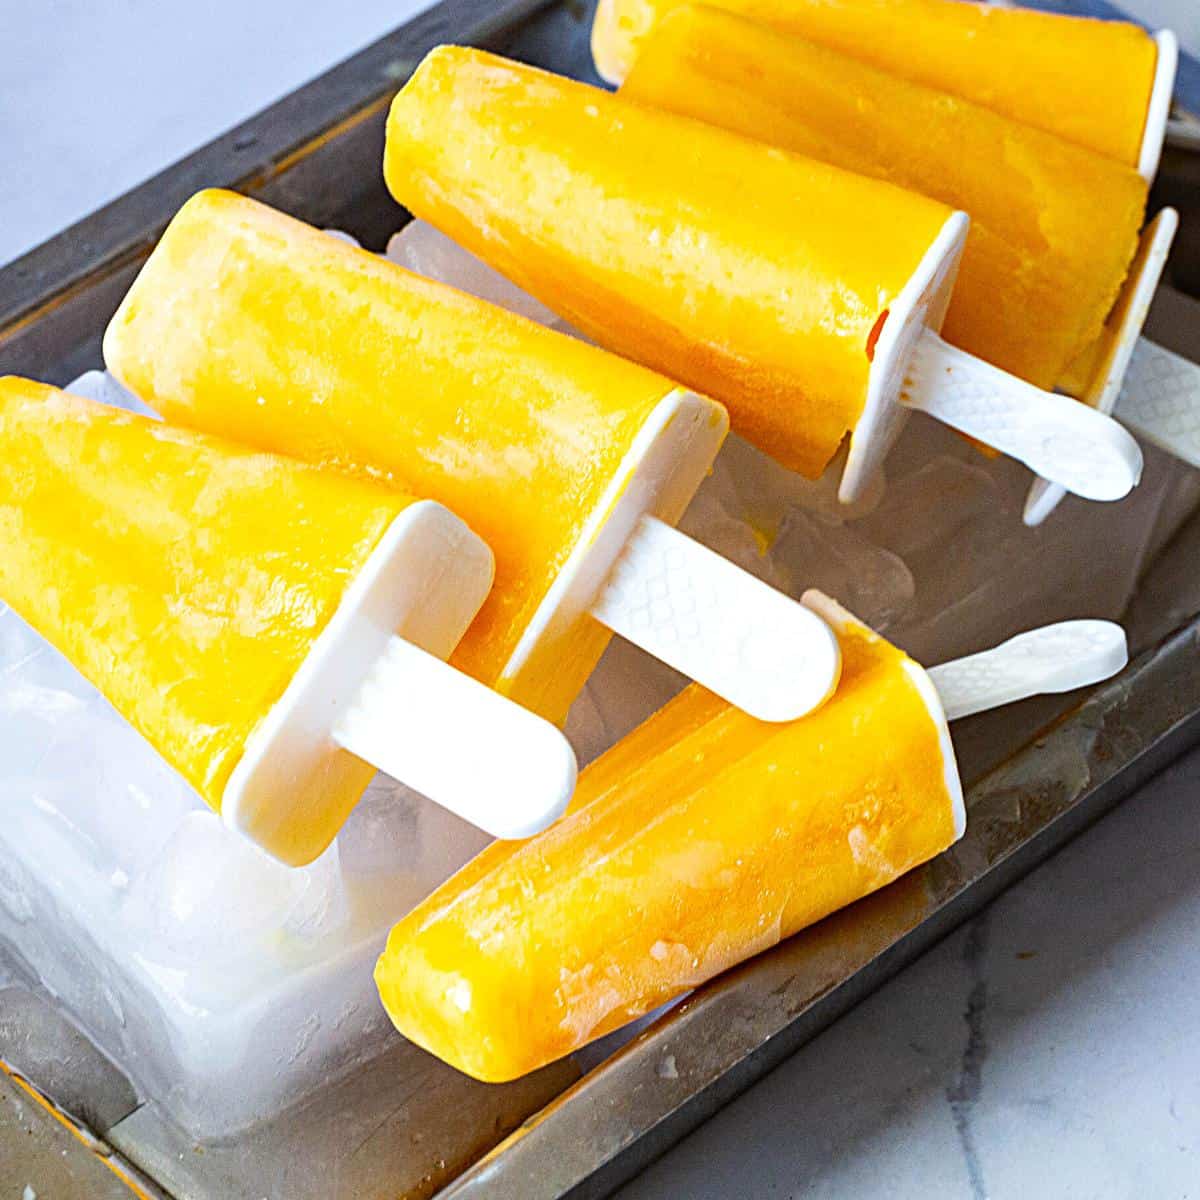 Mango popsicles on a tray of ice.